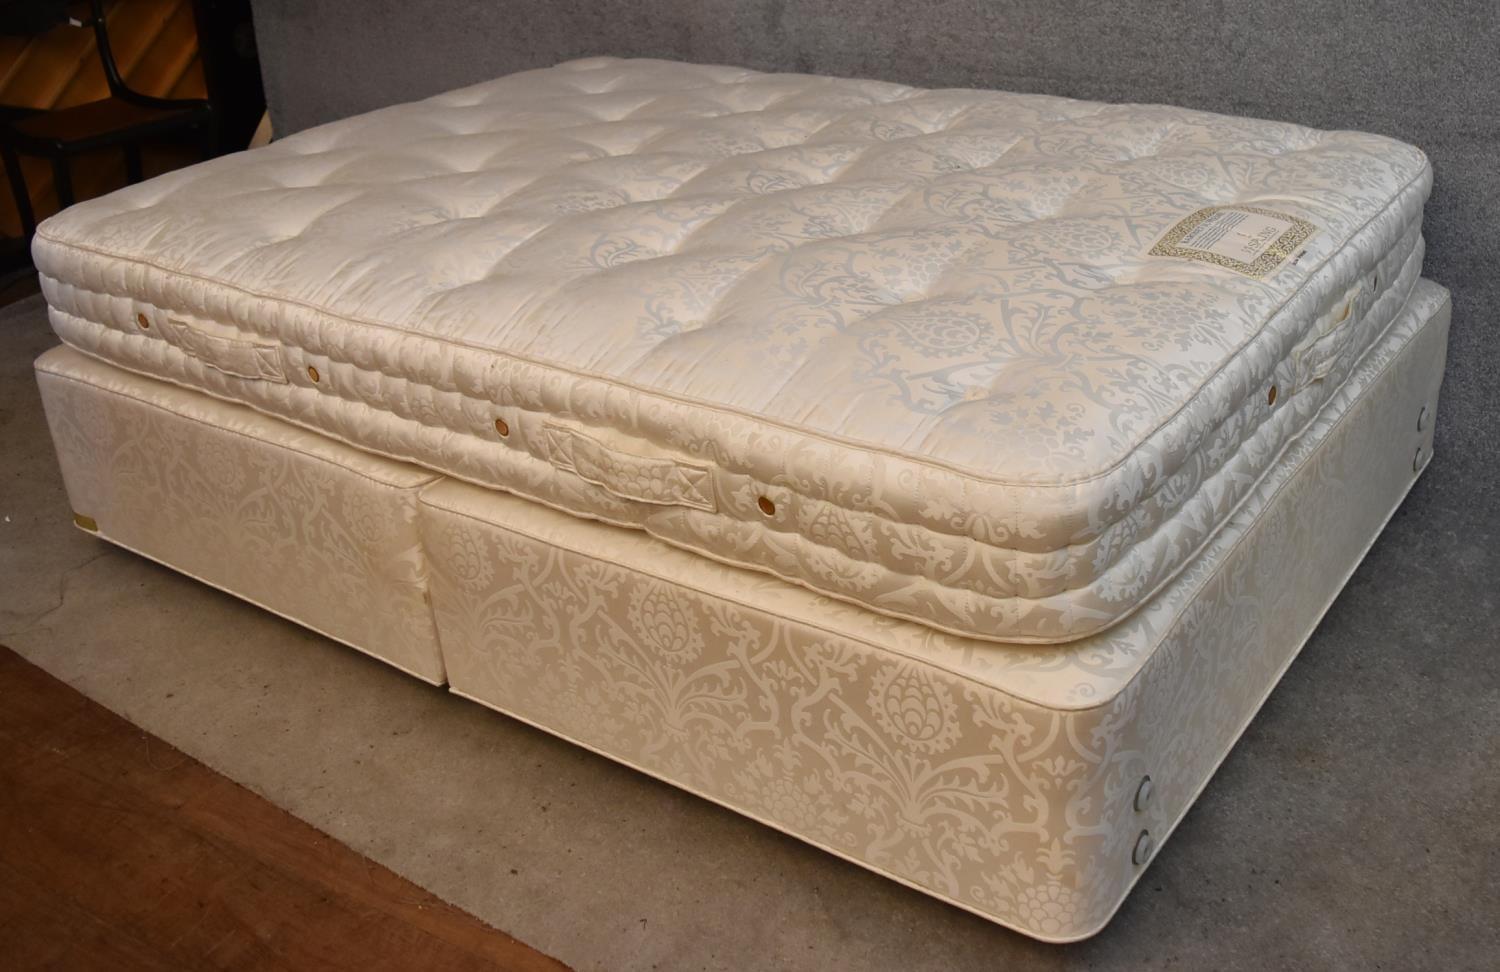 A VI-SPRING divan set. Baronet Supreme. (mattress 4ft 6 inches in very good clean condition) H. - Image 4 of 6